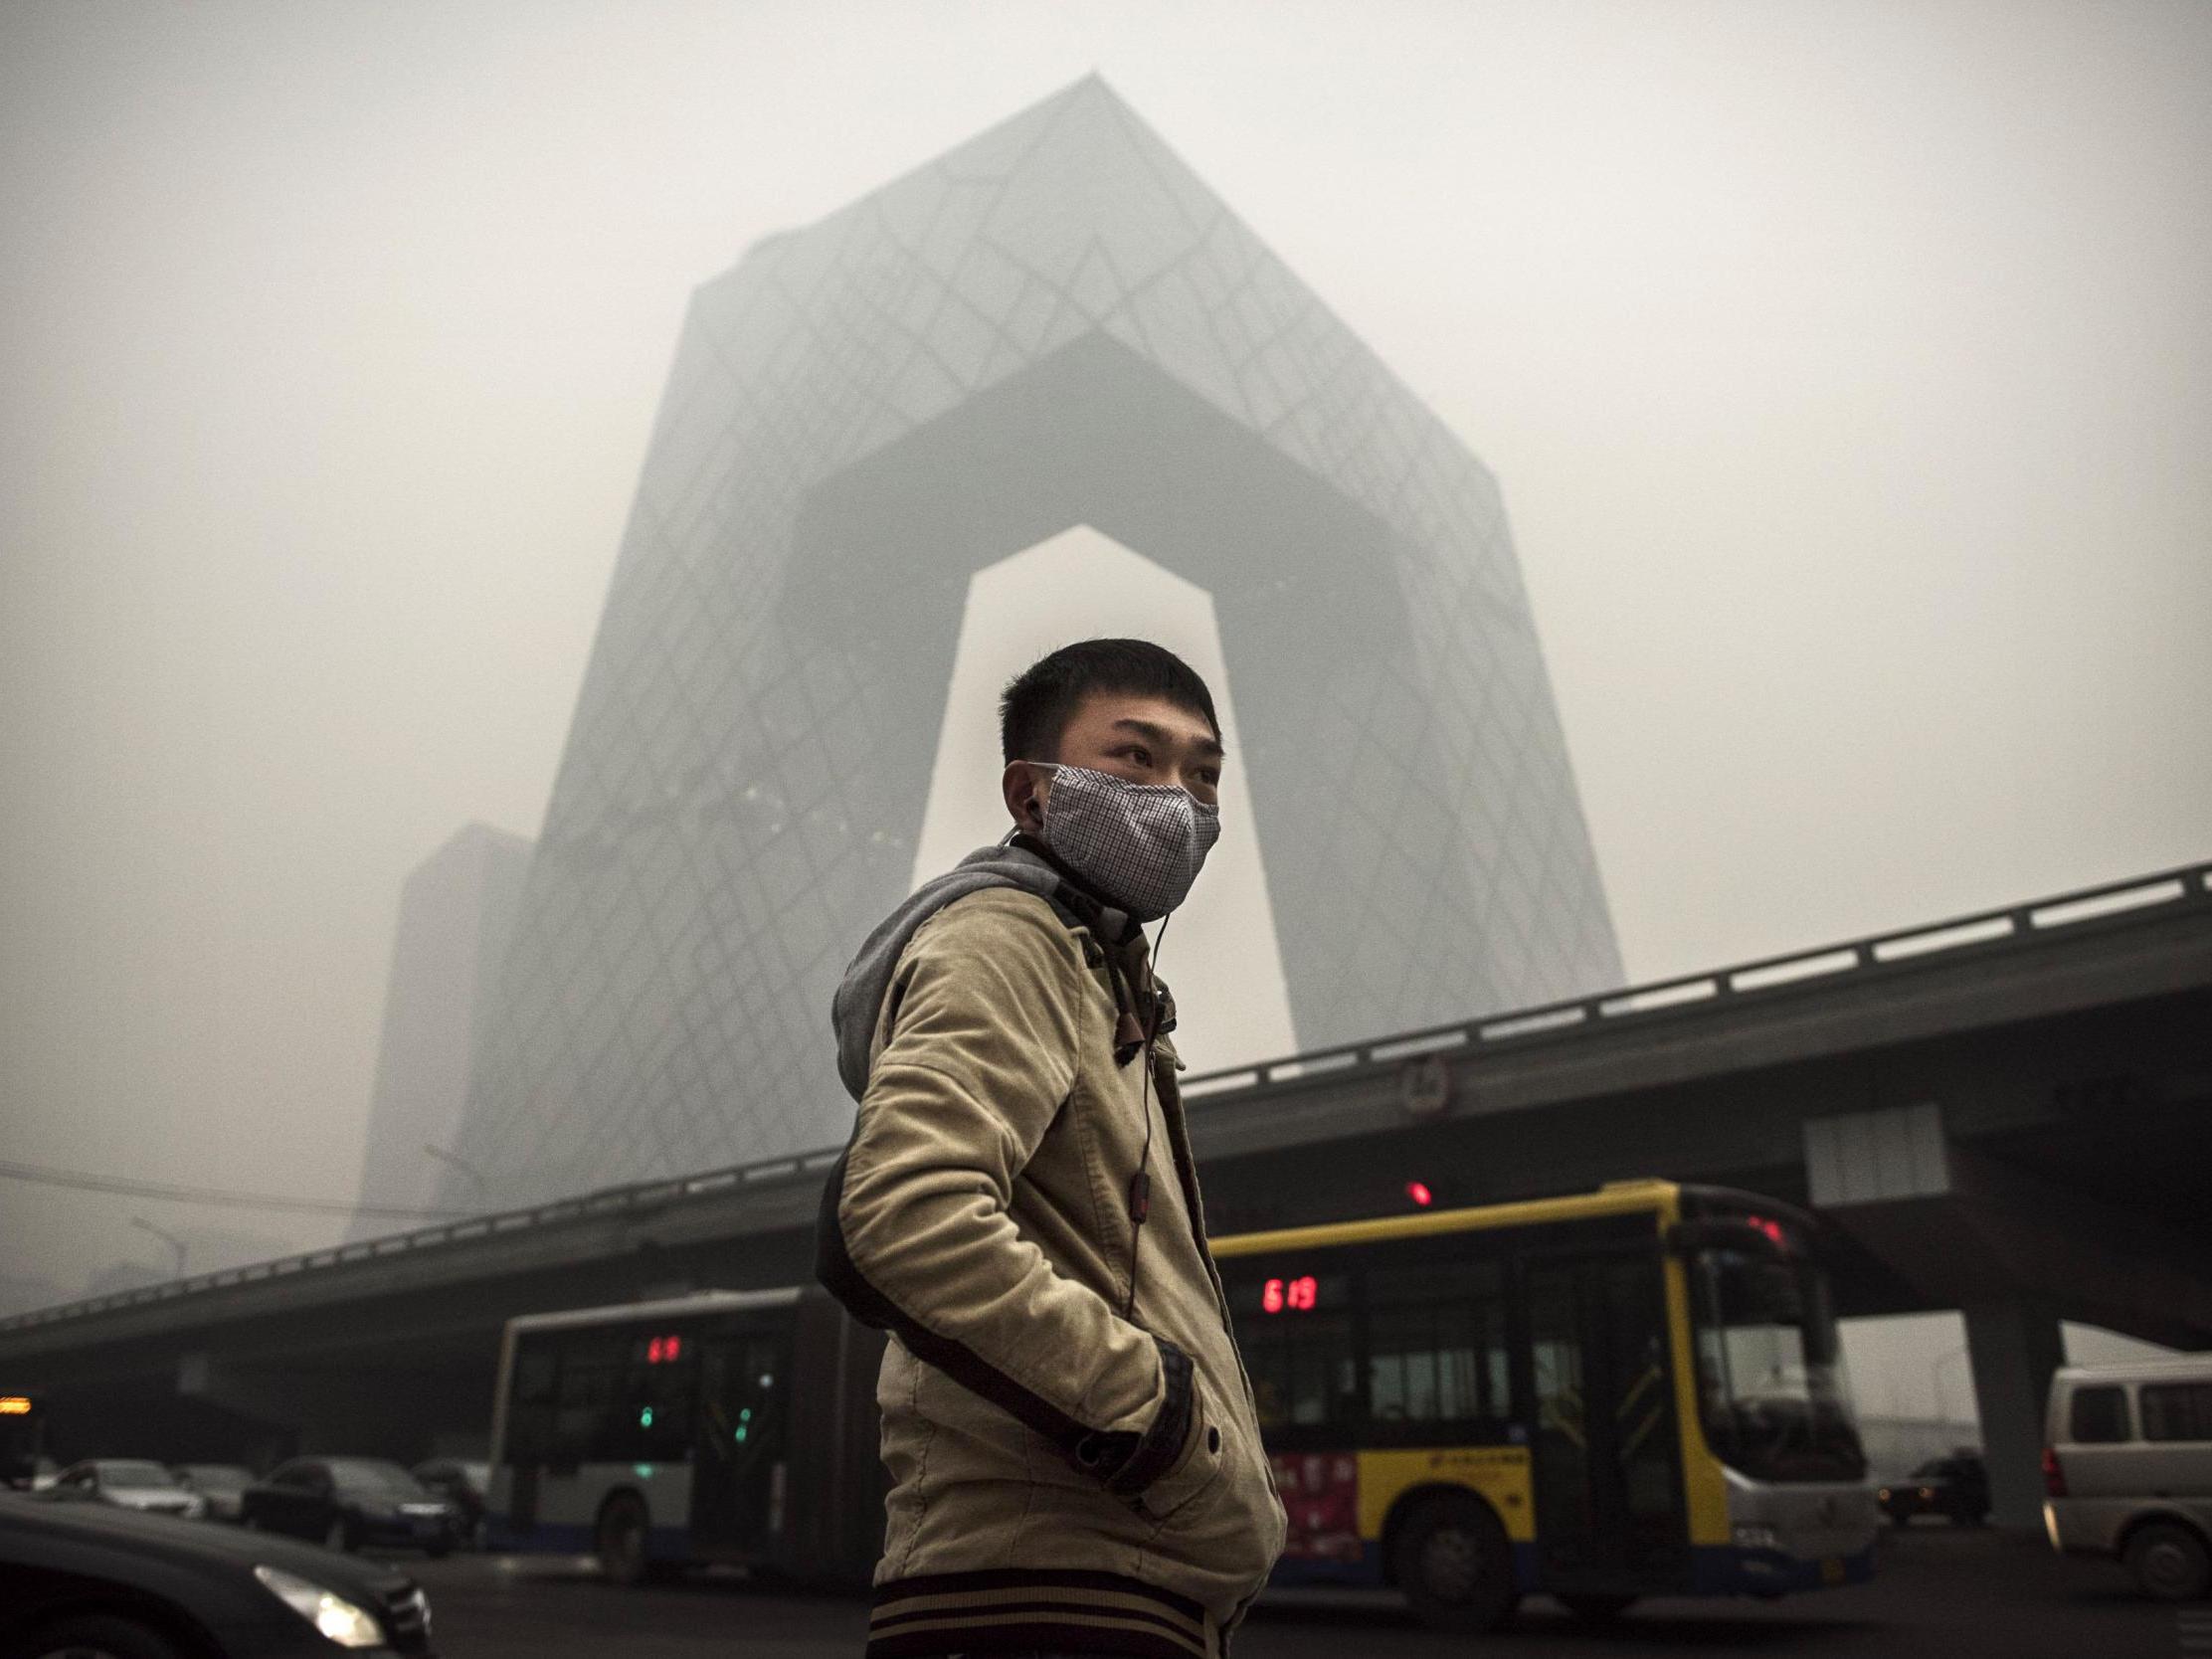 In 2014, air pollution levels in parts of China were 45 times the recommended daily limit